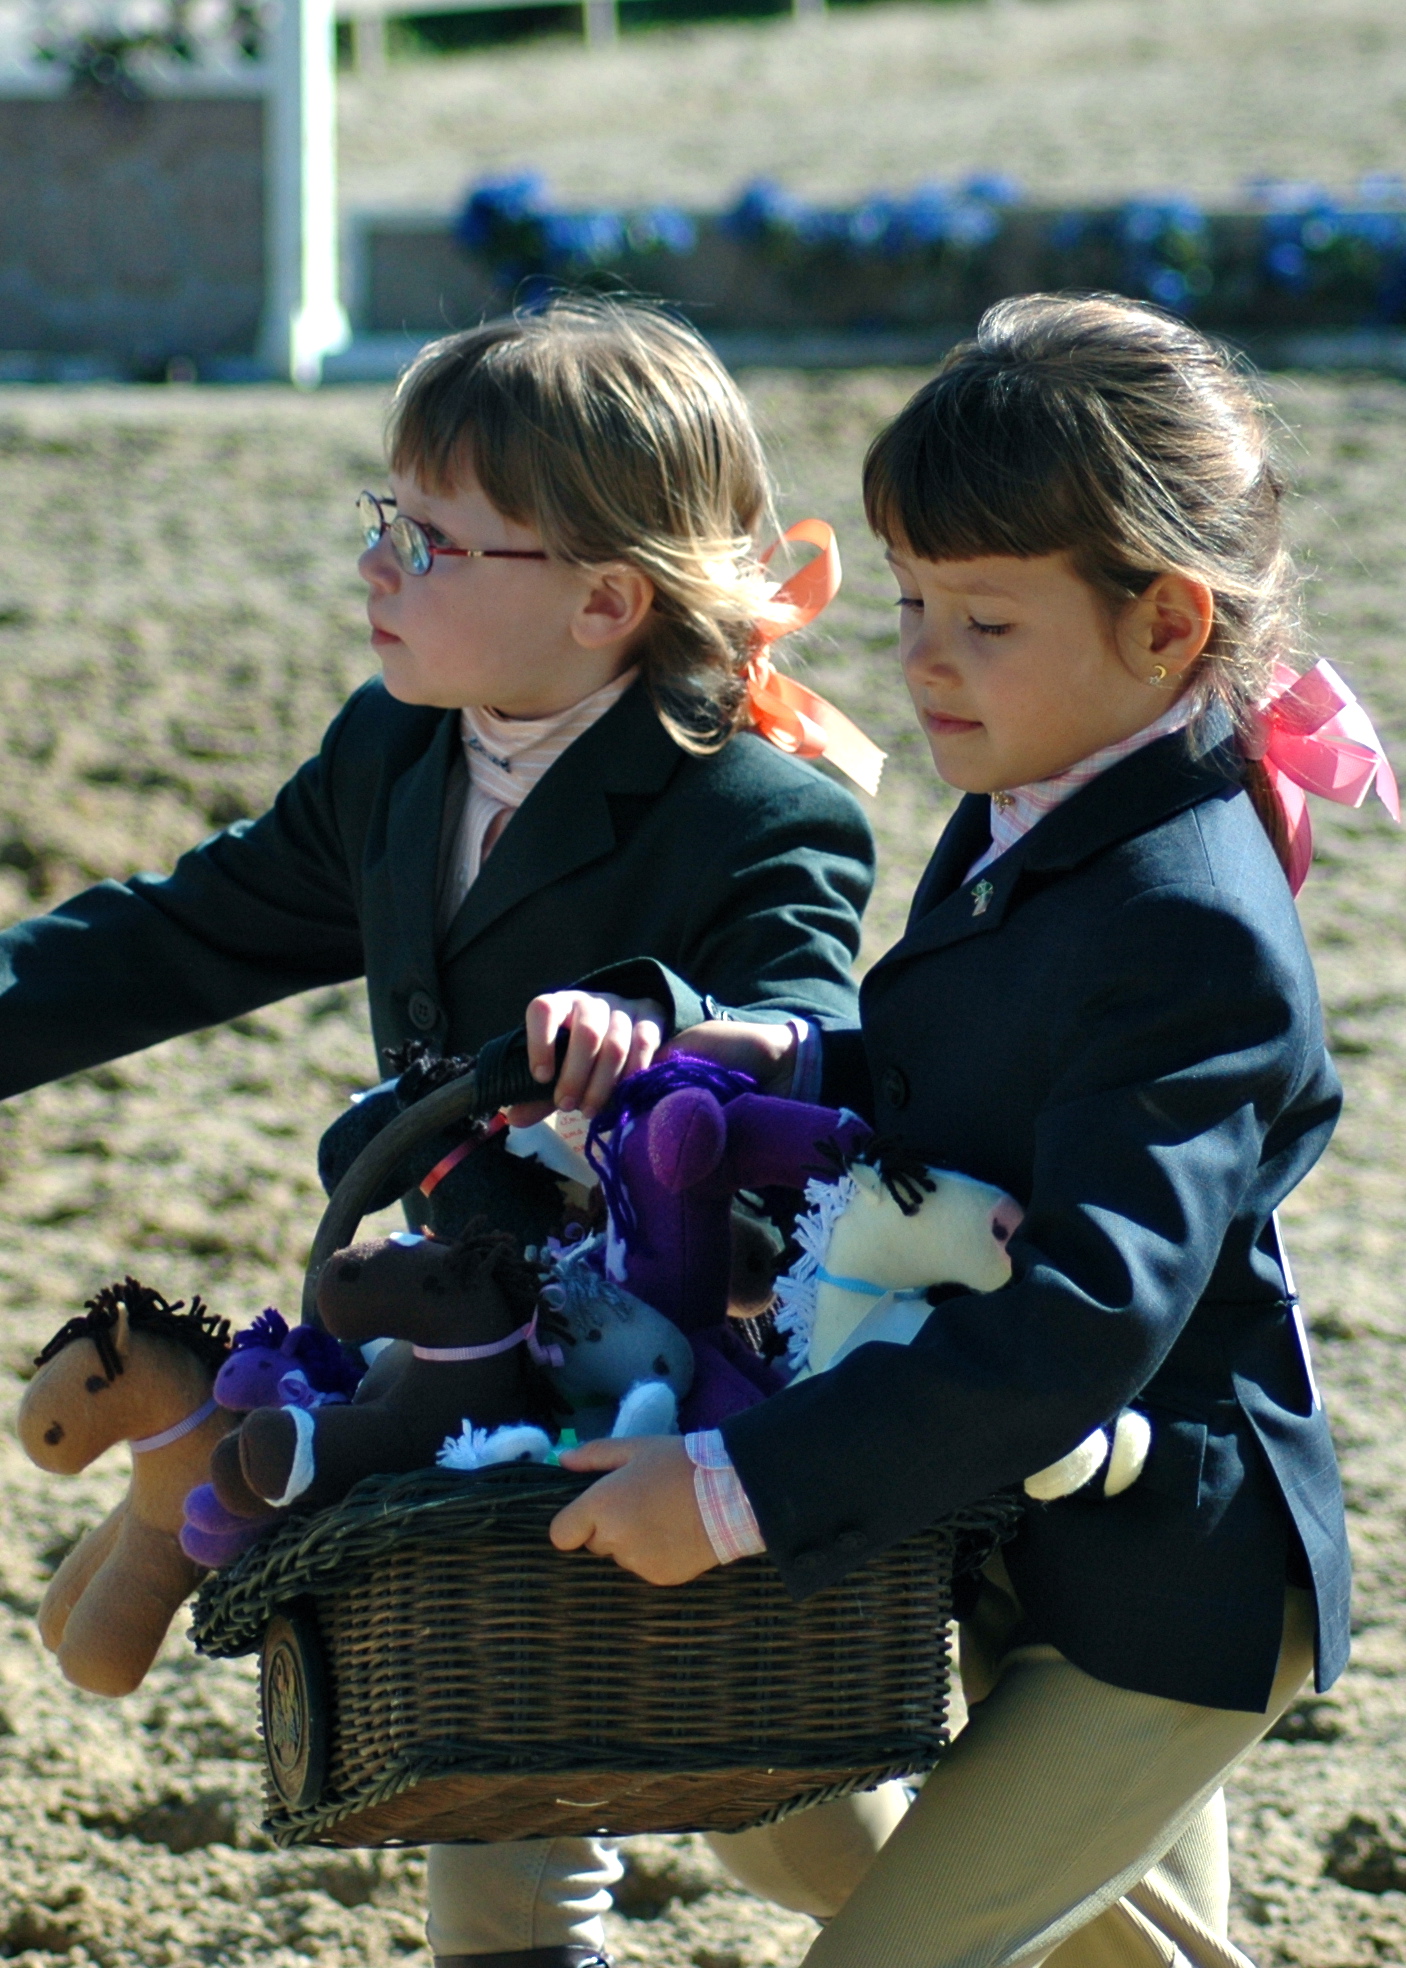 Special Flopsey Ponies awarded in the costume classes.